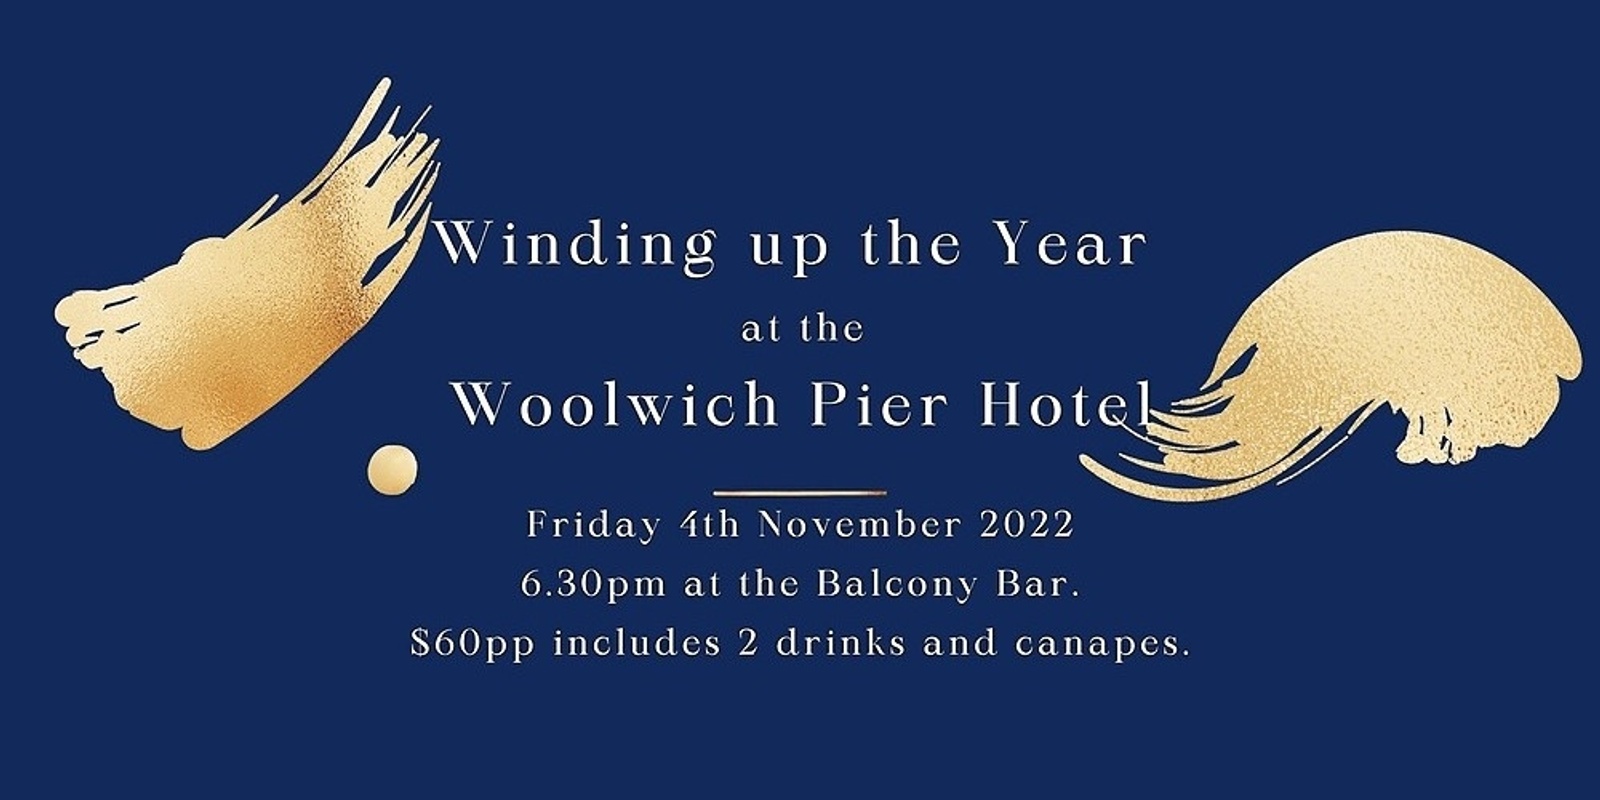 Banner image for Winding up the year at the Woolwich Pier Hotel